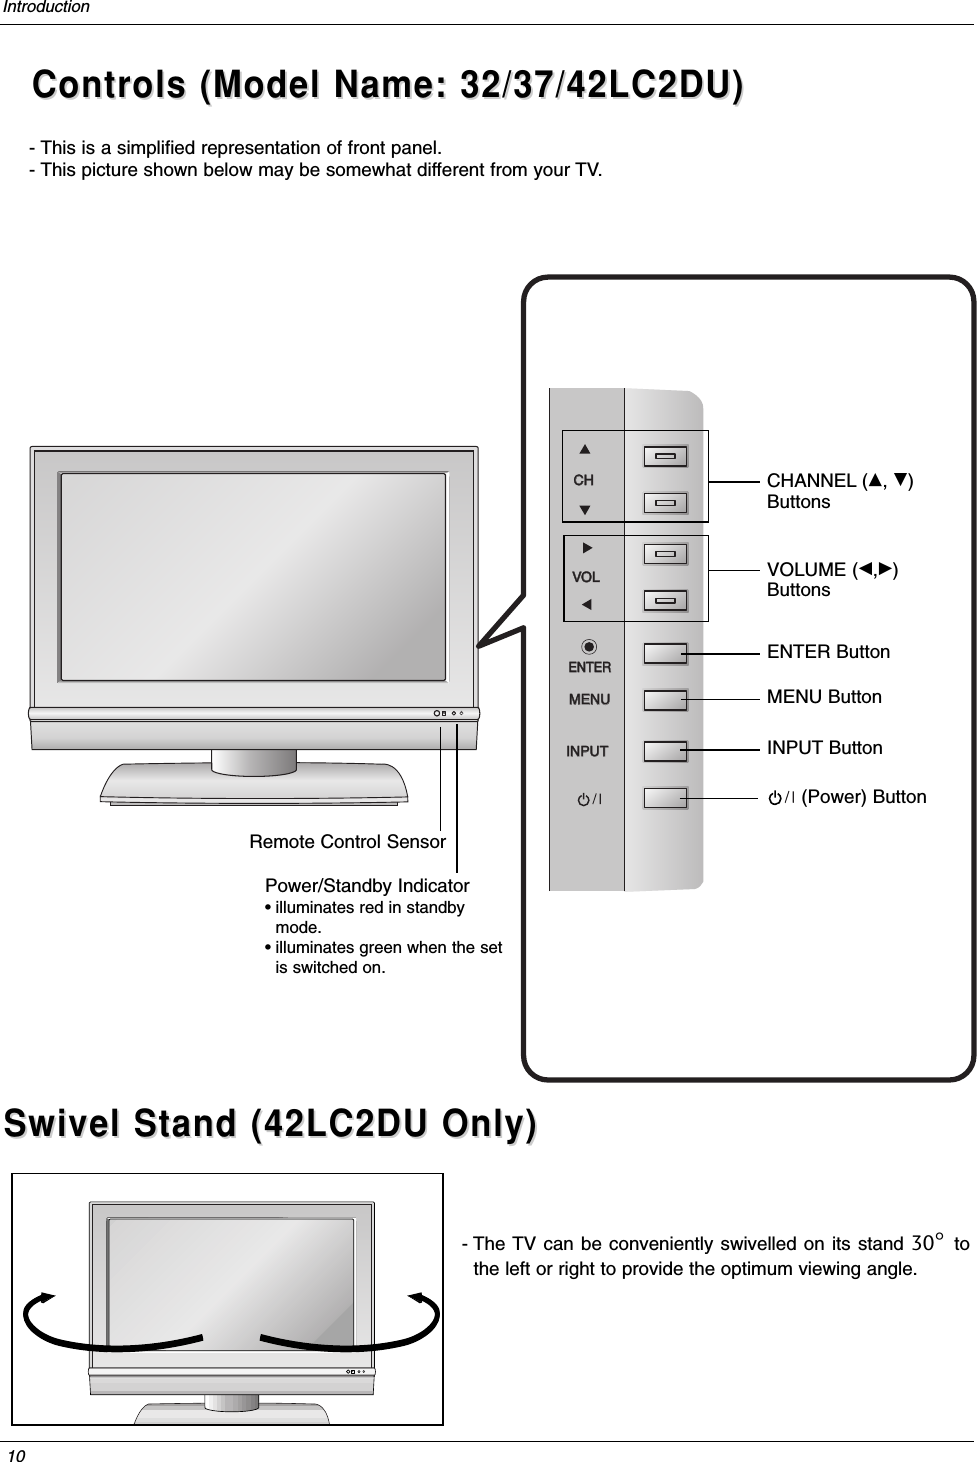 IntroductionControls (Model Name: 32/37/42LC2DU)Controls (Model Name: 32/37/42LC2DU)- This is a simplified representation of front panel. - This picture shown below may be somewhat different from your TV.10RCHCHVOLVOLENTERENTERMENUMENUINPUTINPUTCHANNEL (D, E)ButtonsVOLUME (F,G)ButtonsENTER ButtonMENU ButtonINPUT ButtonRemote Control SensorPower/Standby Indicator• illuminates red in standbymode.• illuminates green when the setis switched on.(Power) ButtonSwivel Stand (42LC2DU Only)Swivel Stand (42LC2DU Only)R- The TV can be conveniently swivelled on its stand 30°tothe left or right to provide the optimum viewing angle.